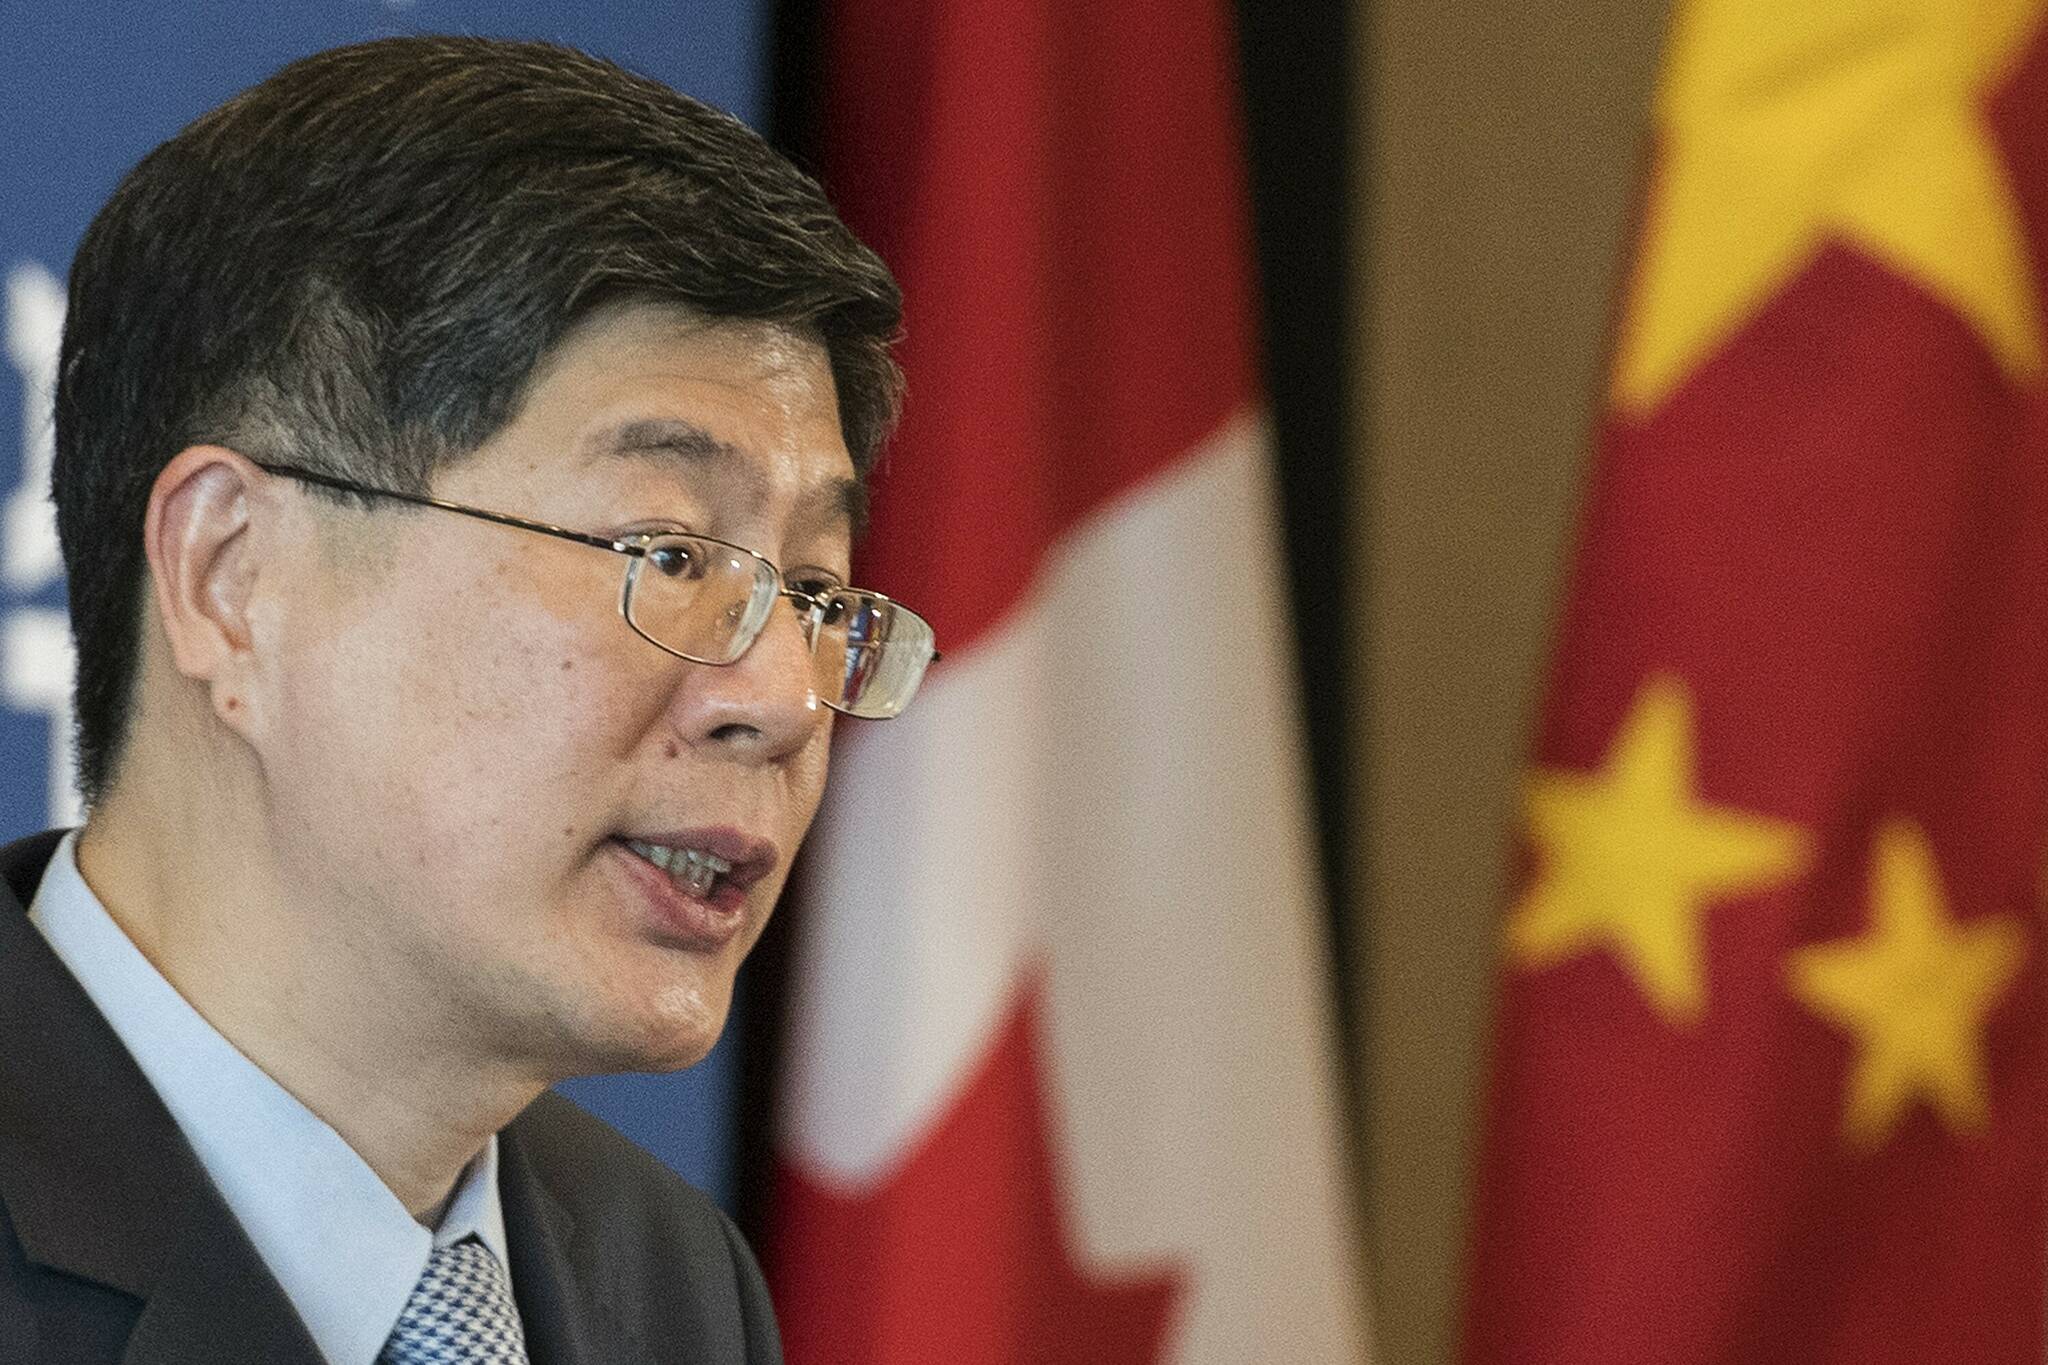 Chinese ambassador to Canada Cong Peiwu speaks during a luncheon in Montreal, Thursday, December 5, 2019. THE CANADIAN PRESS/Graham Hughes